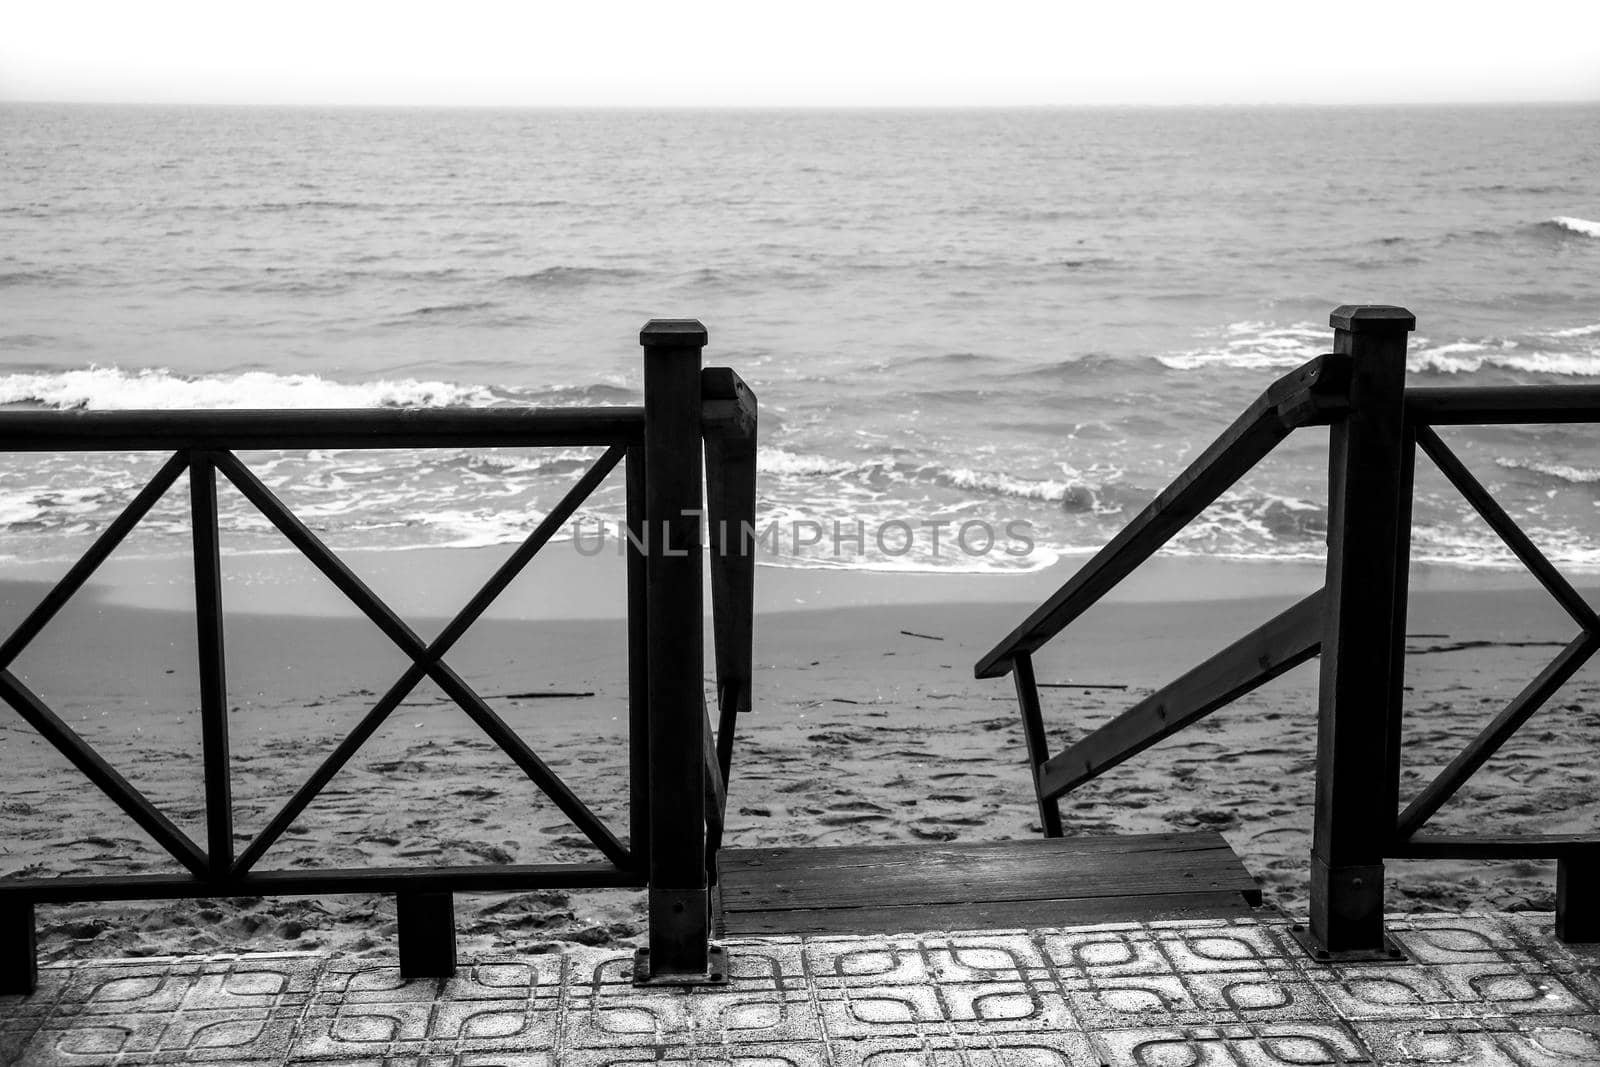 Wooden staircase to access the beach broken by the storm. Monochrome picture